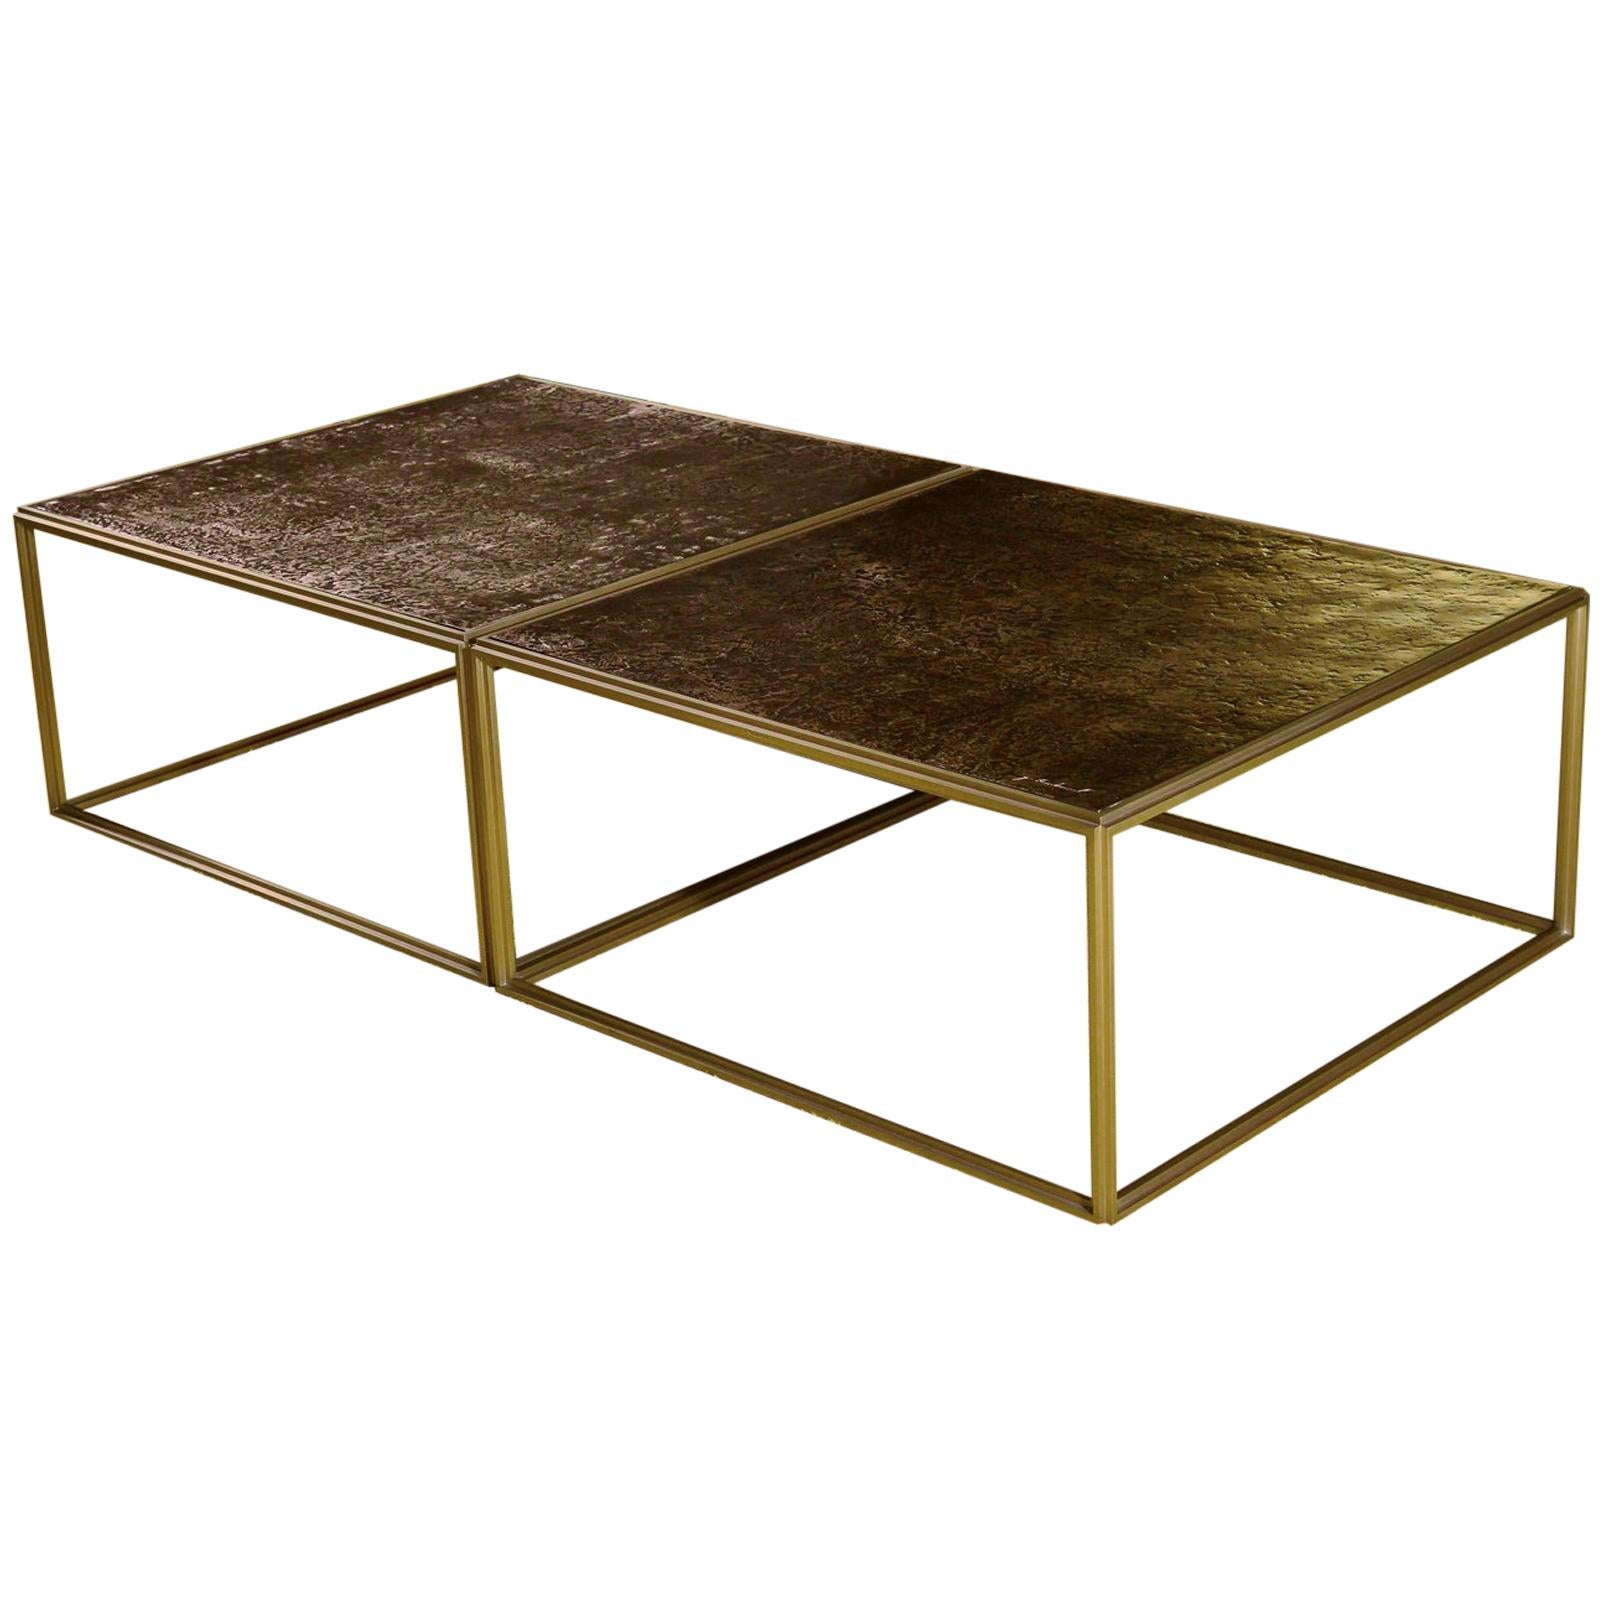 1 Brass Low Table, Hand Cast Polished Bronze Top, One of a kind by P. Tendercool